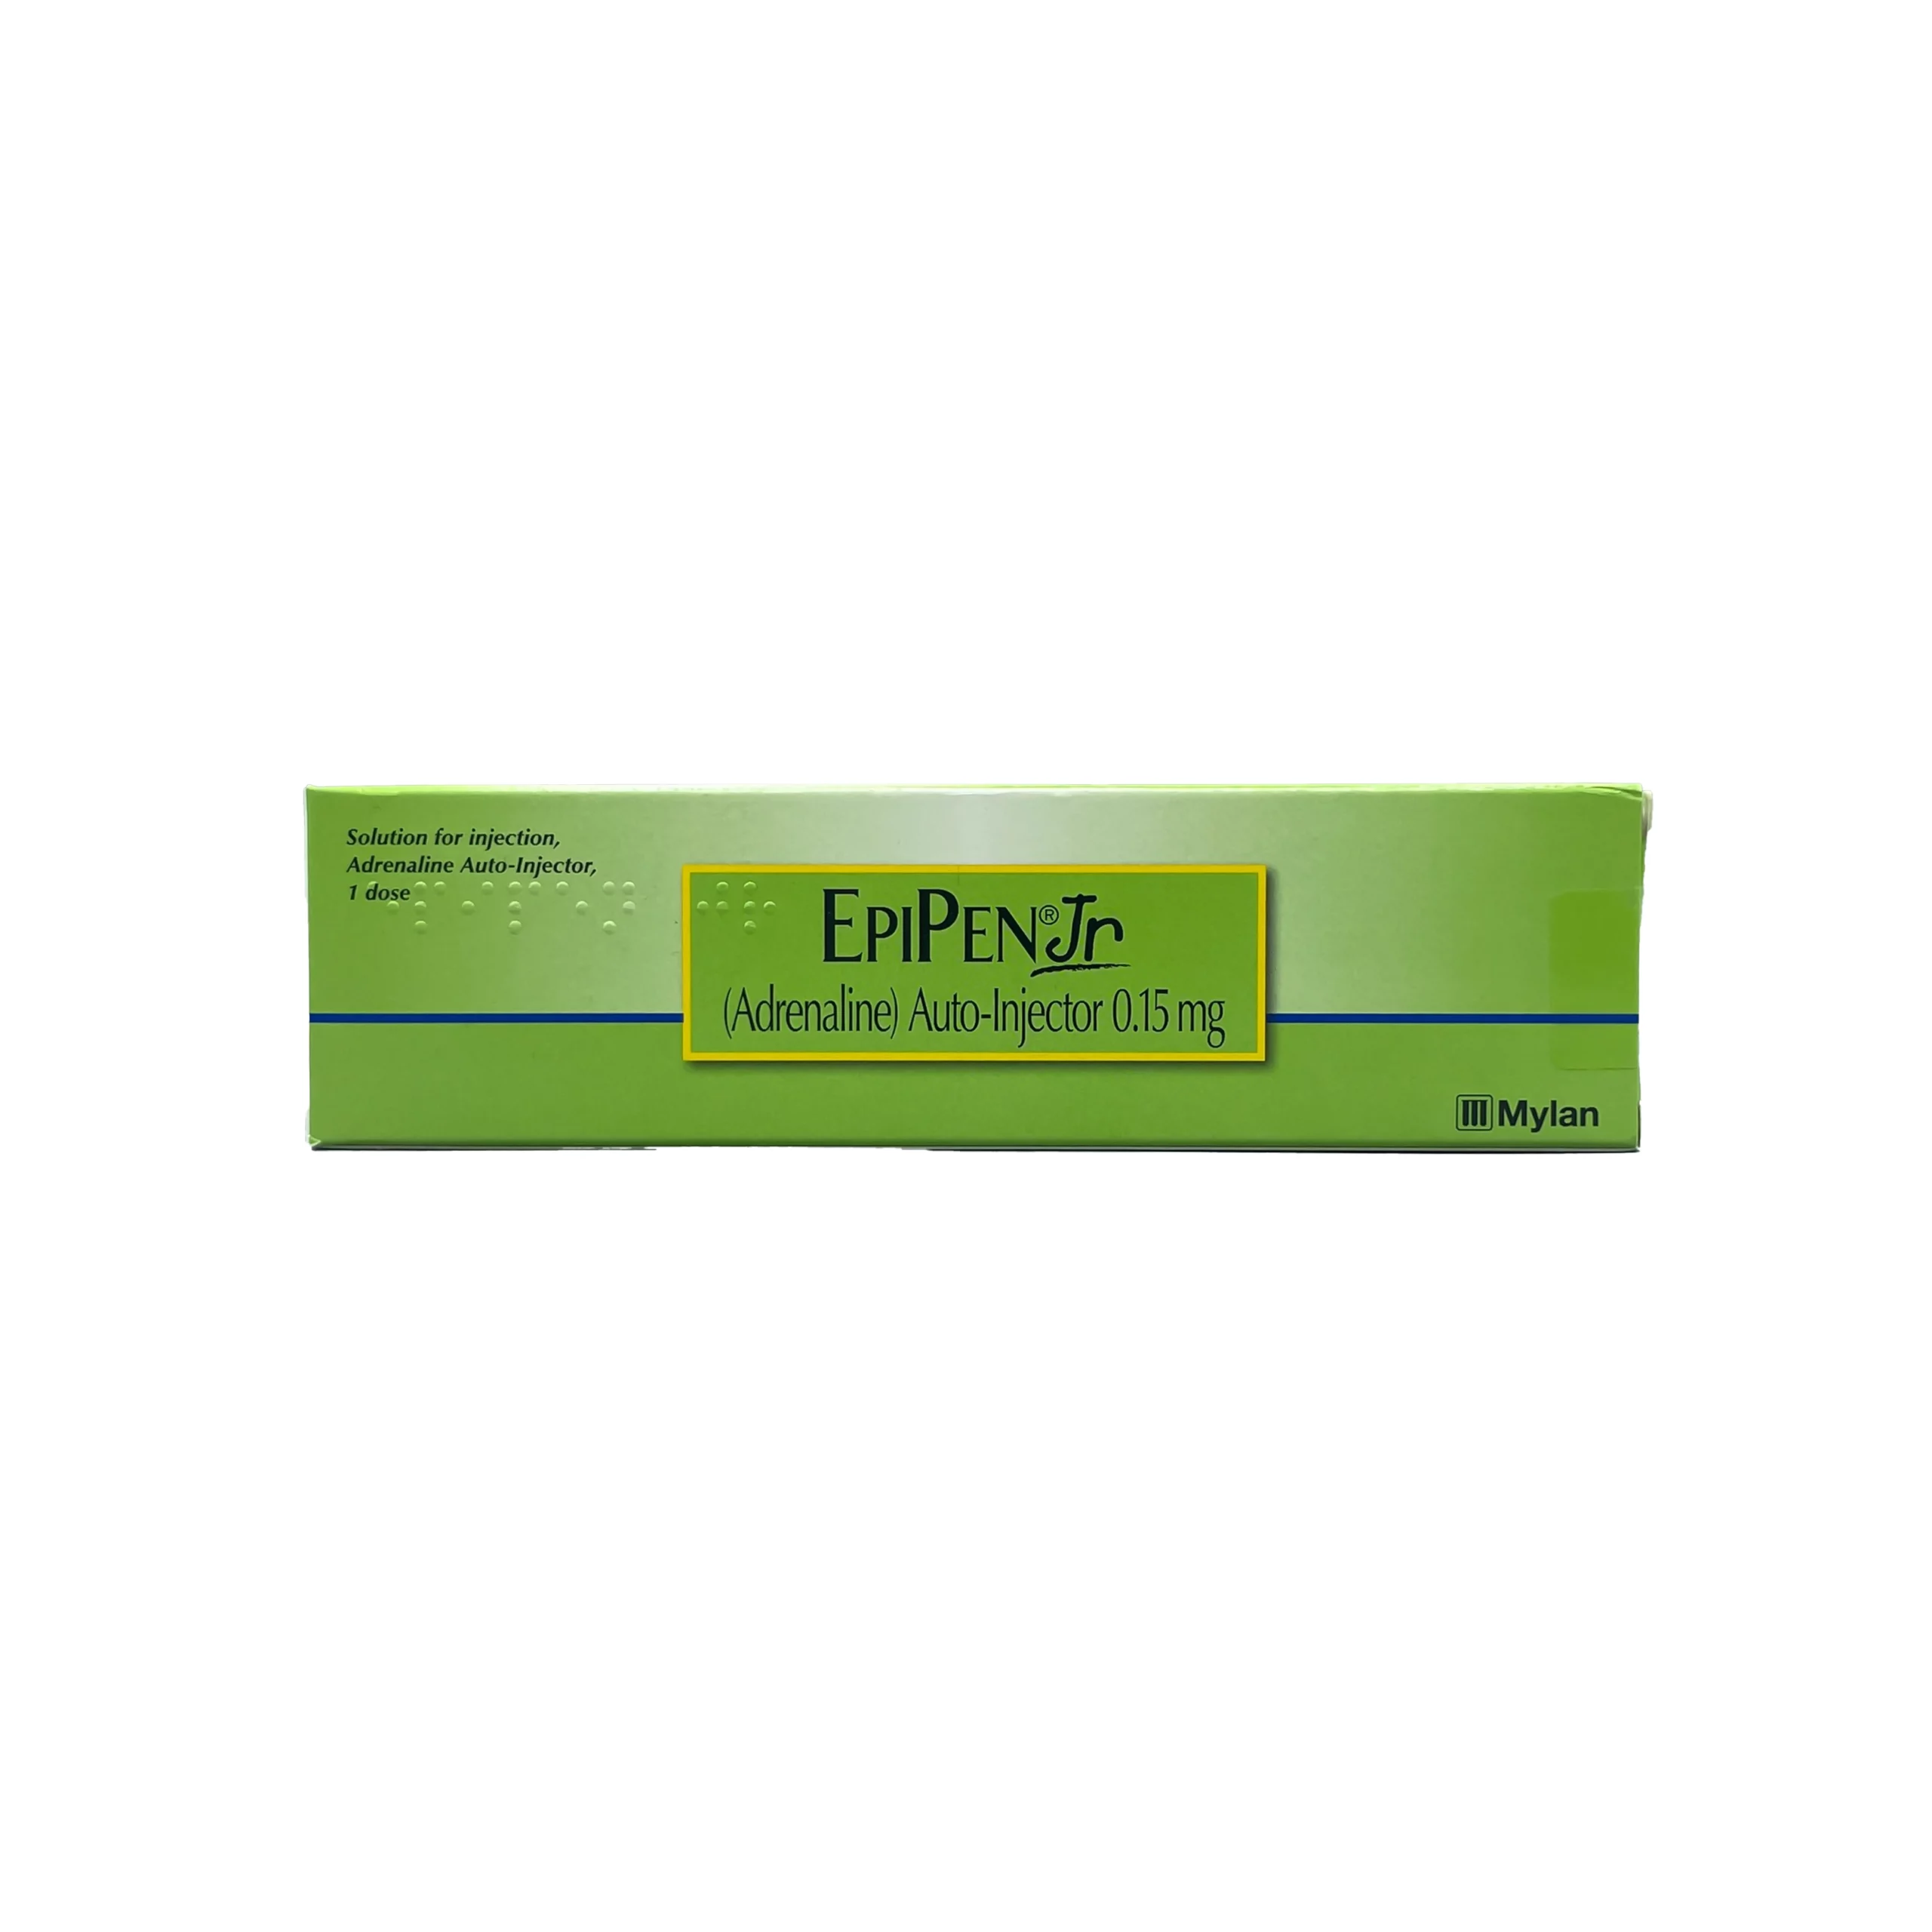 Epipen 0.15 mg auto-injector